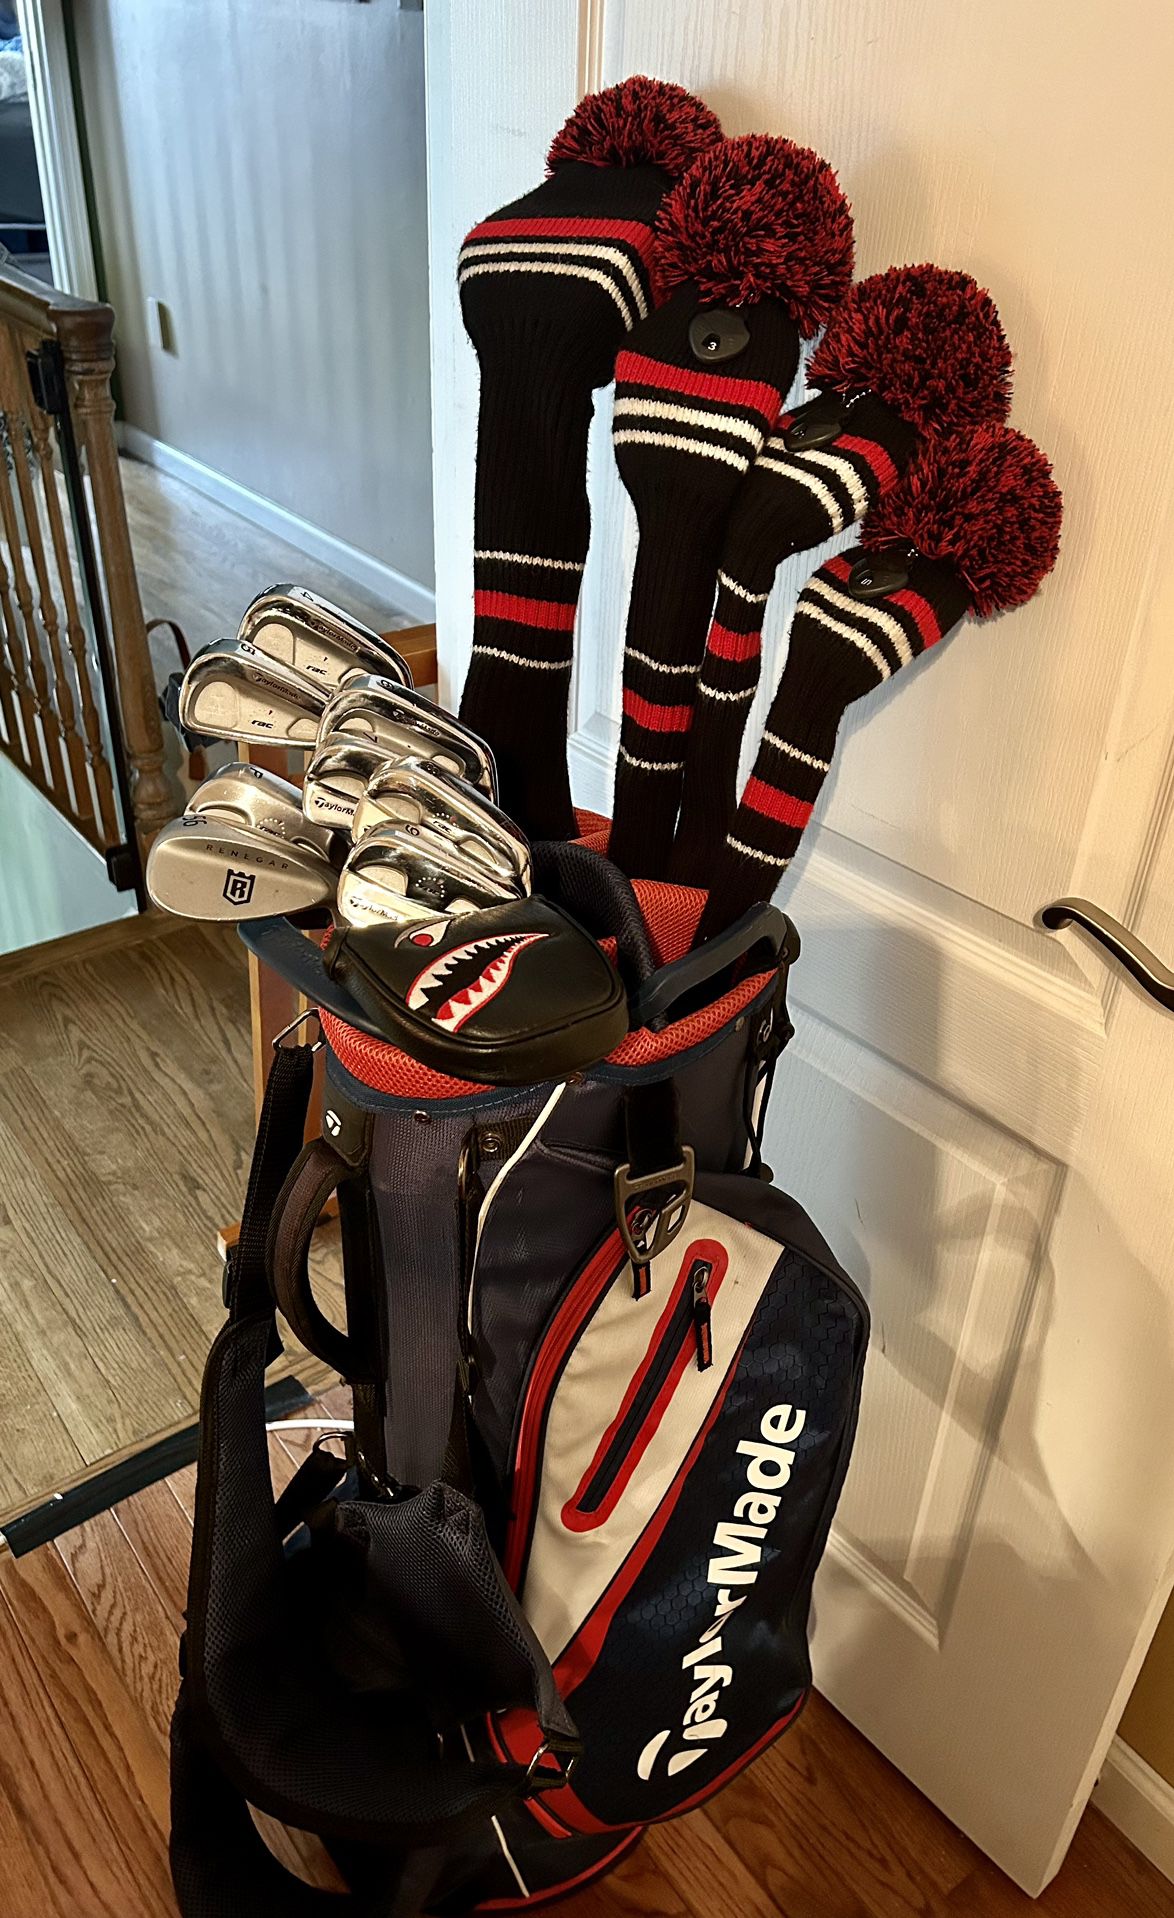 TaylorMade Pro Golf Set Complete